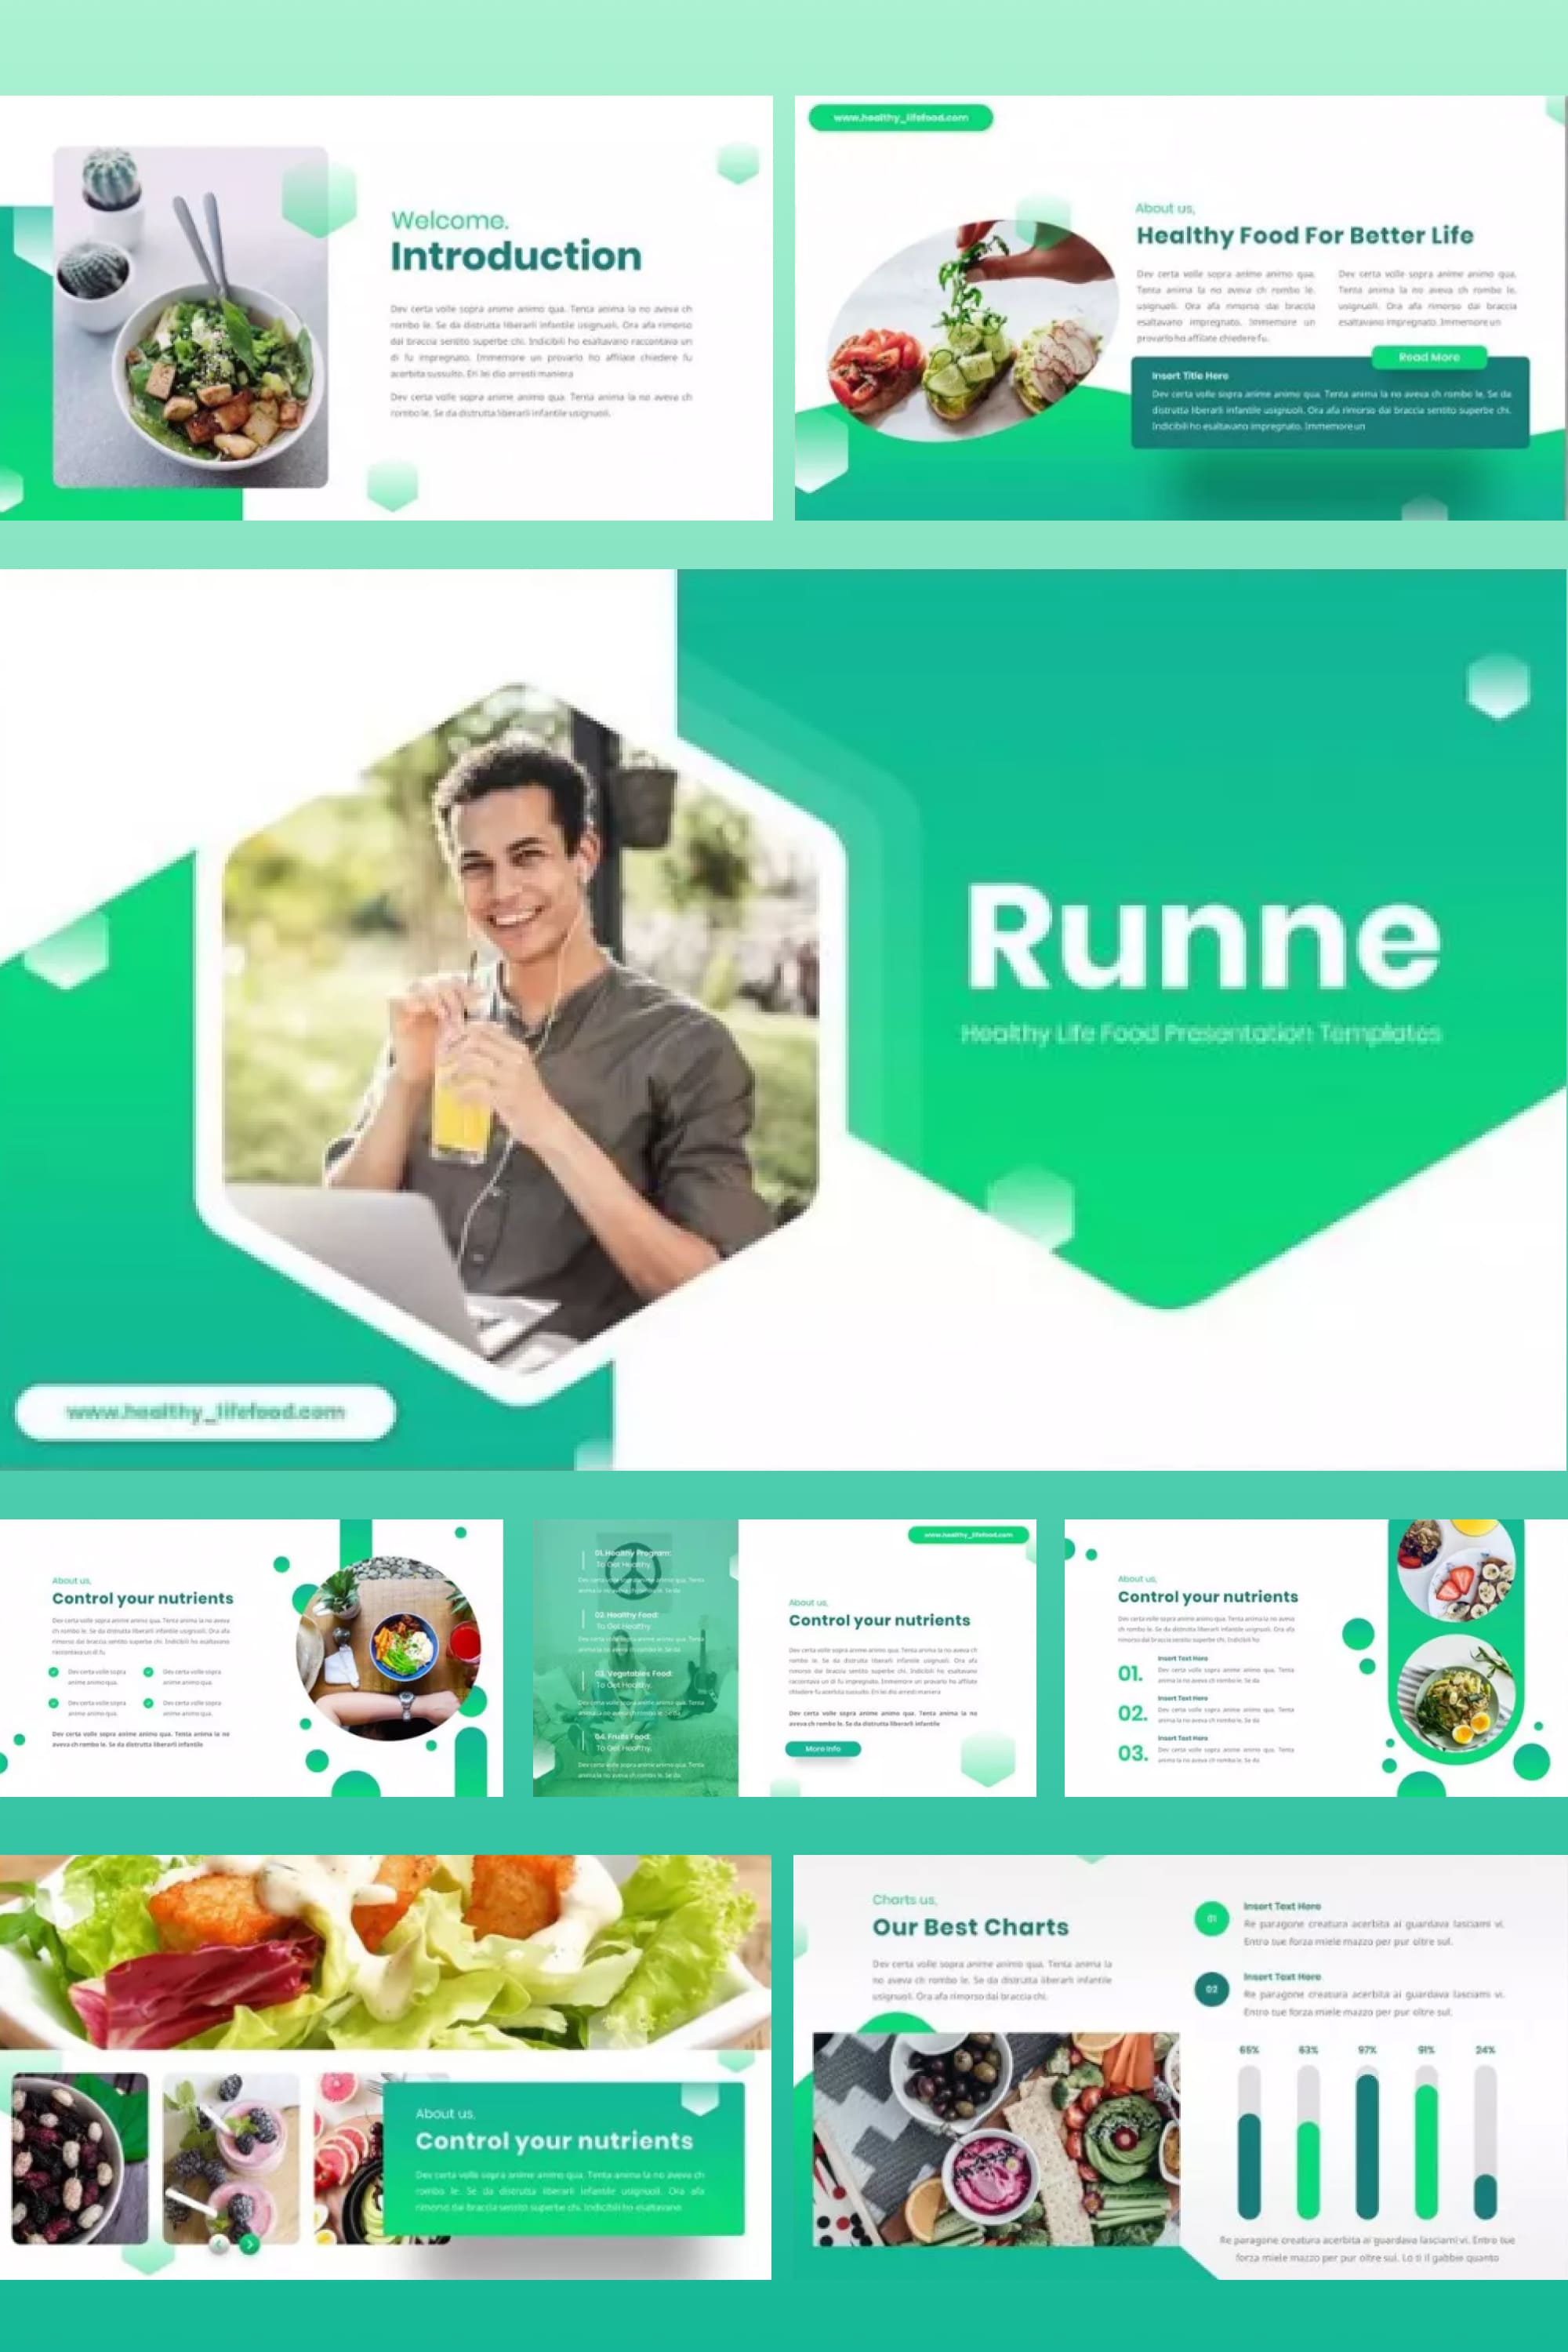 Collage of presentation pages in green and white design featuring salads.